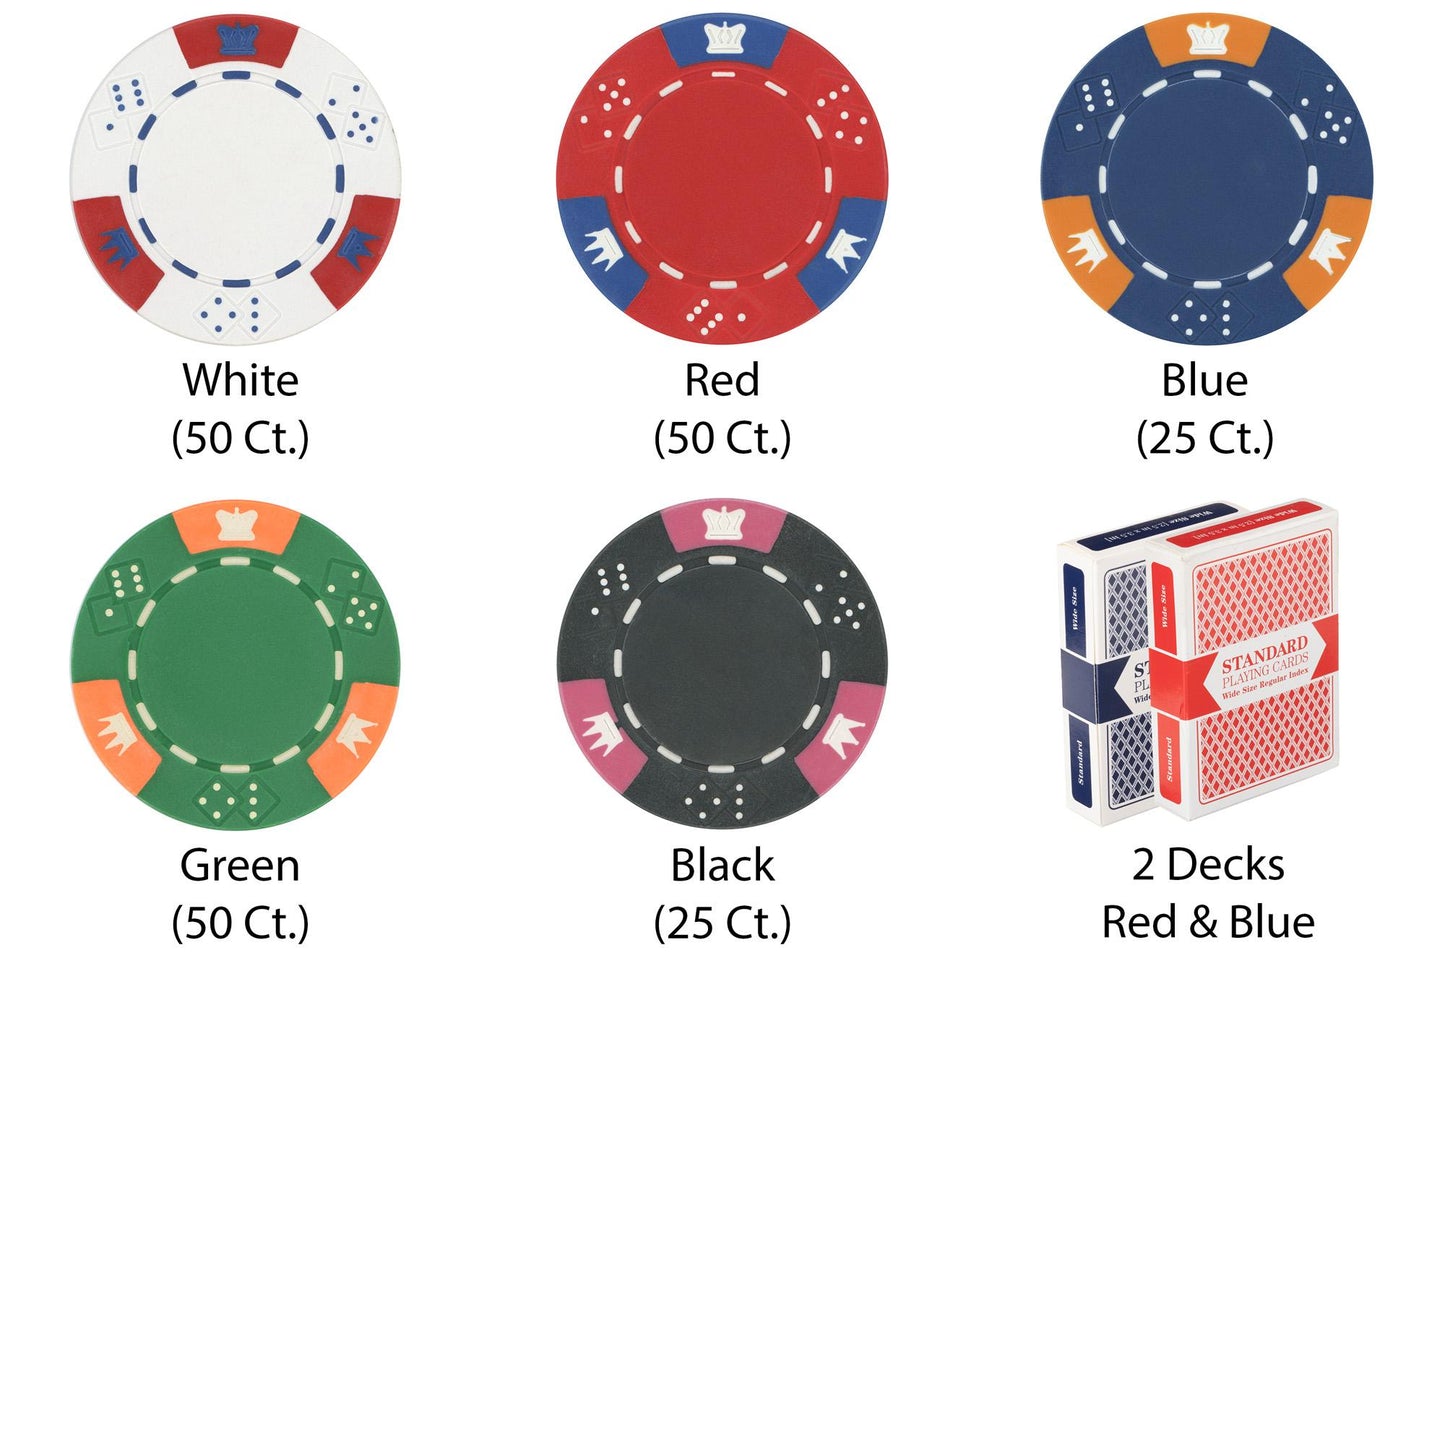 200 Crown and Dice Poker Chips with Wooden Carousel